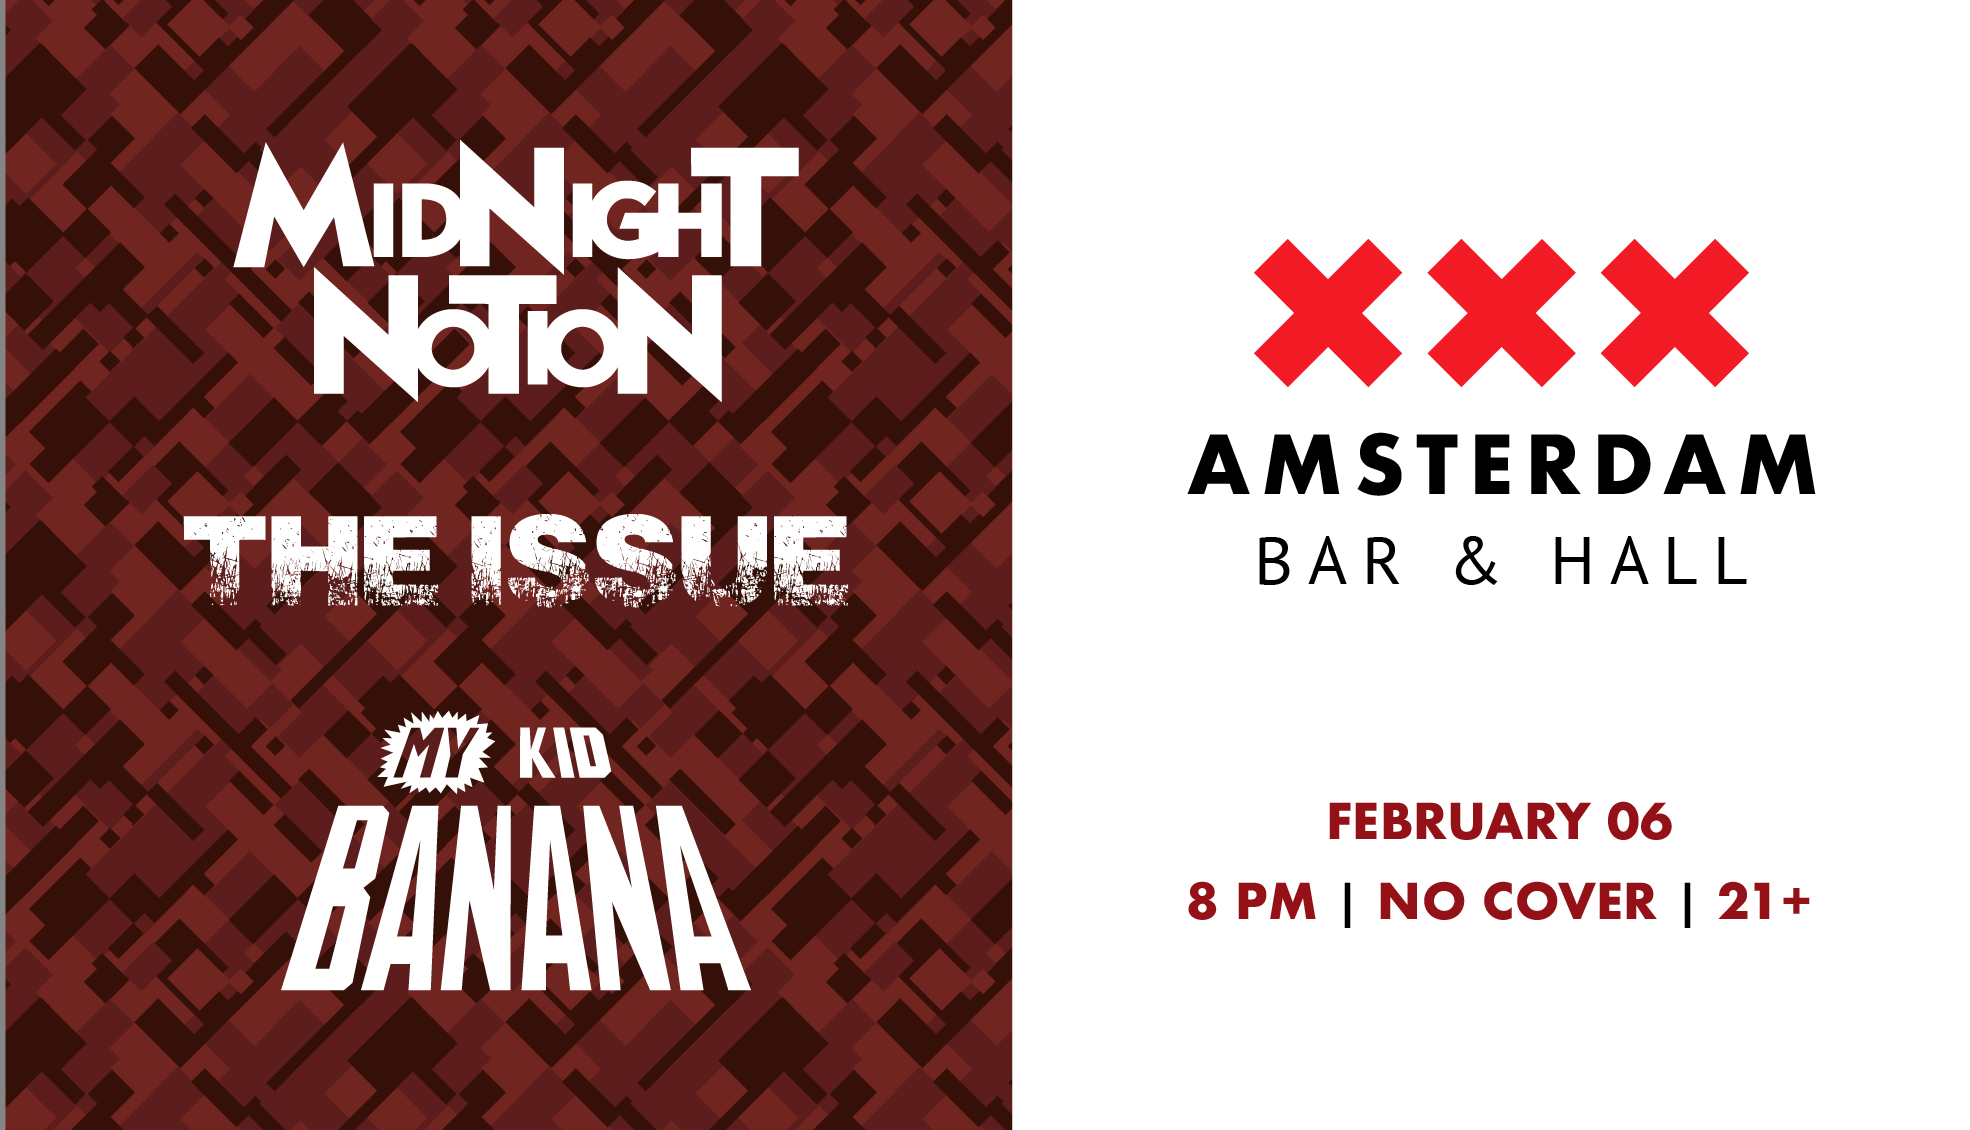 A poster for Midnight Notion, The Issue, and My Kid Banana at Amsterdam Bar & Hall. The bands are white text on a red patterned background, and the show details are black on a white background.